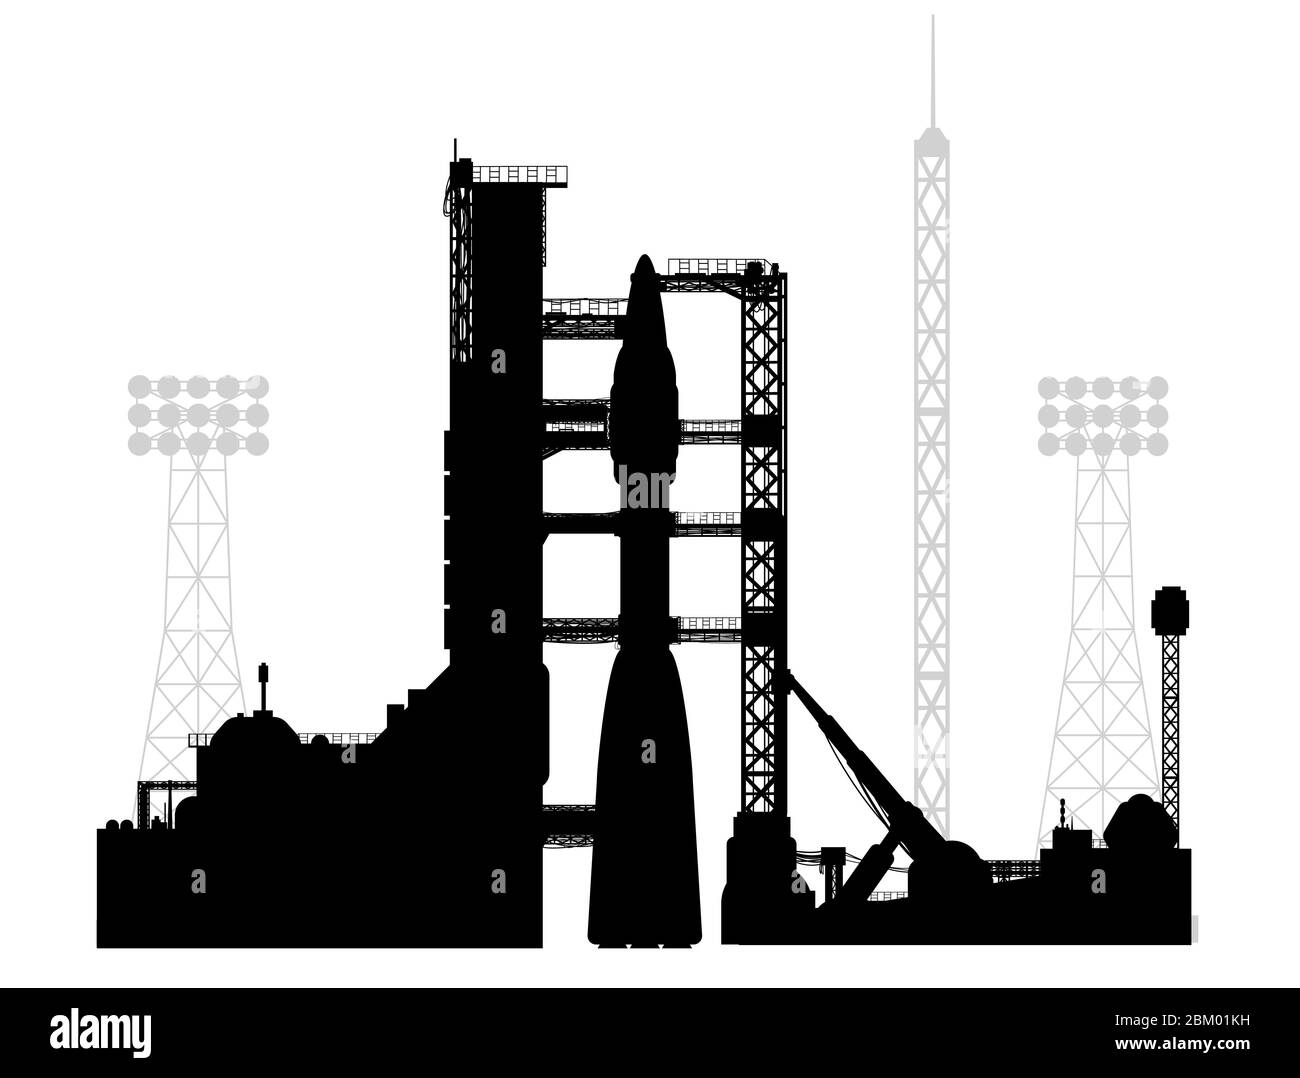 Vector drawing of a cosmodrome in a silhouette style. Stock Vector